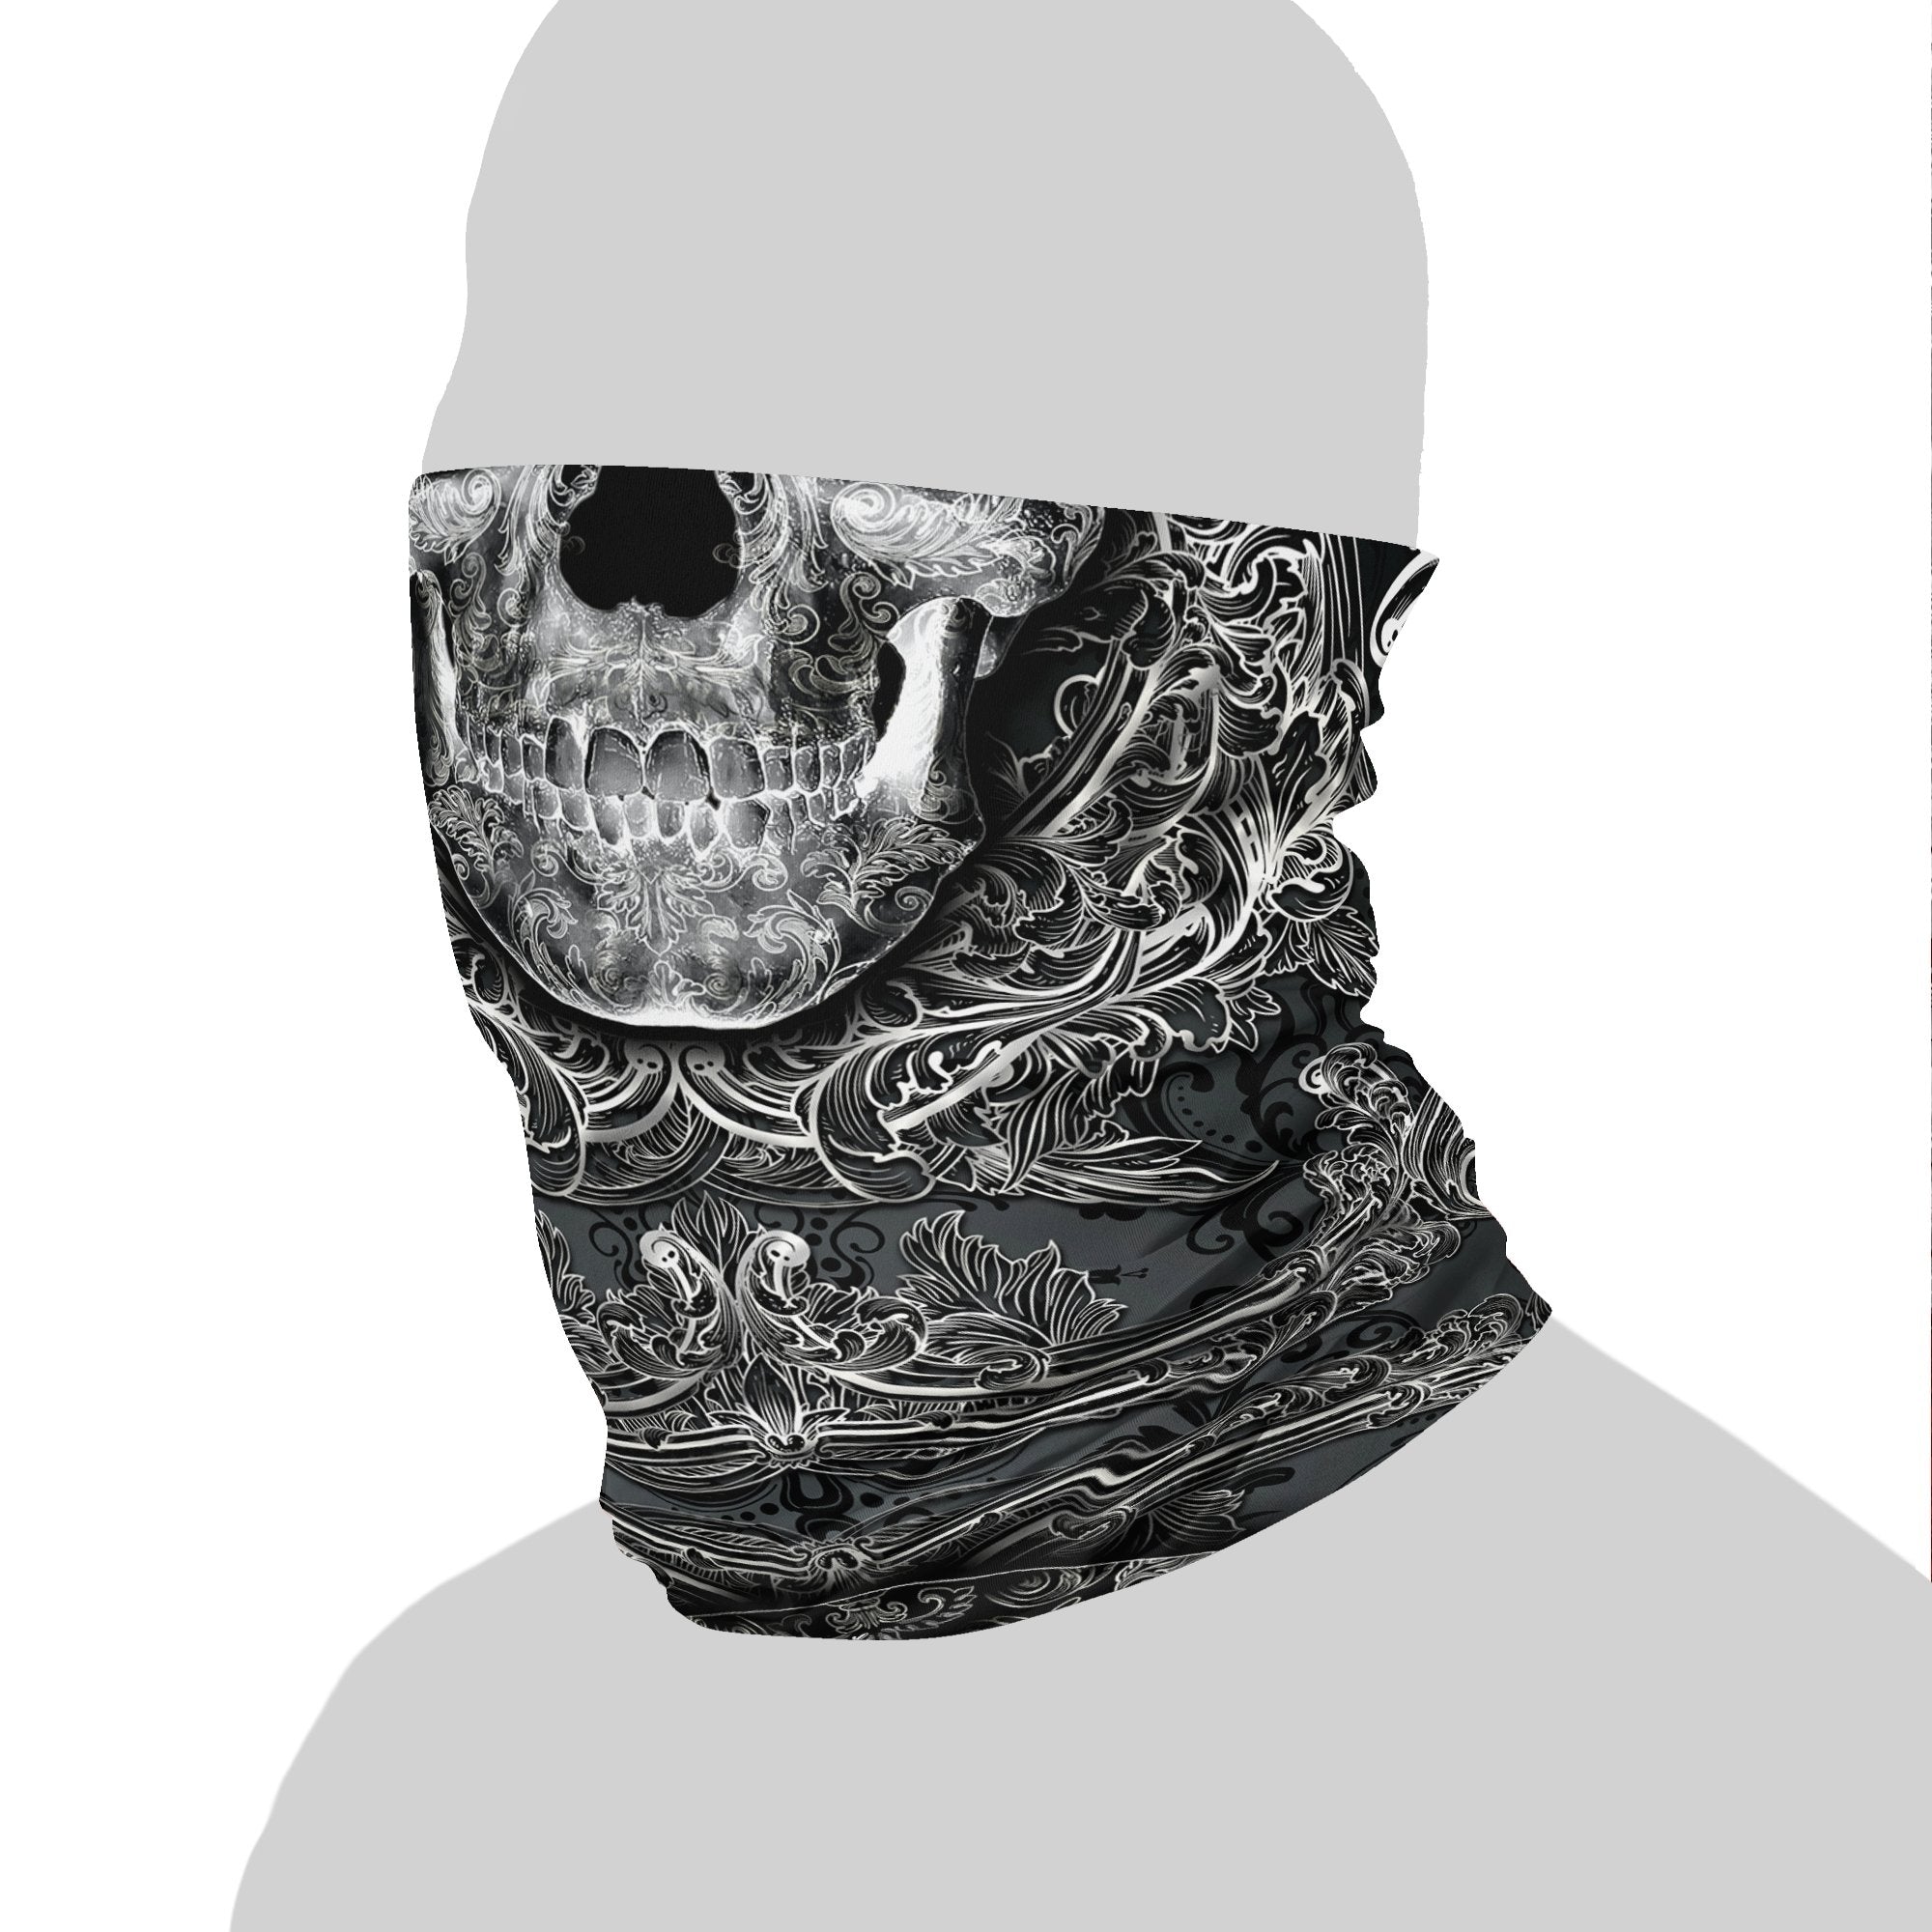 Skull Neck Gaiter, Face Mask, Head Covering, Gothic Street Outfit - Dark - Abysm Internal